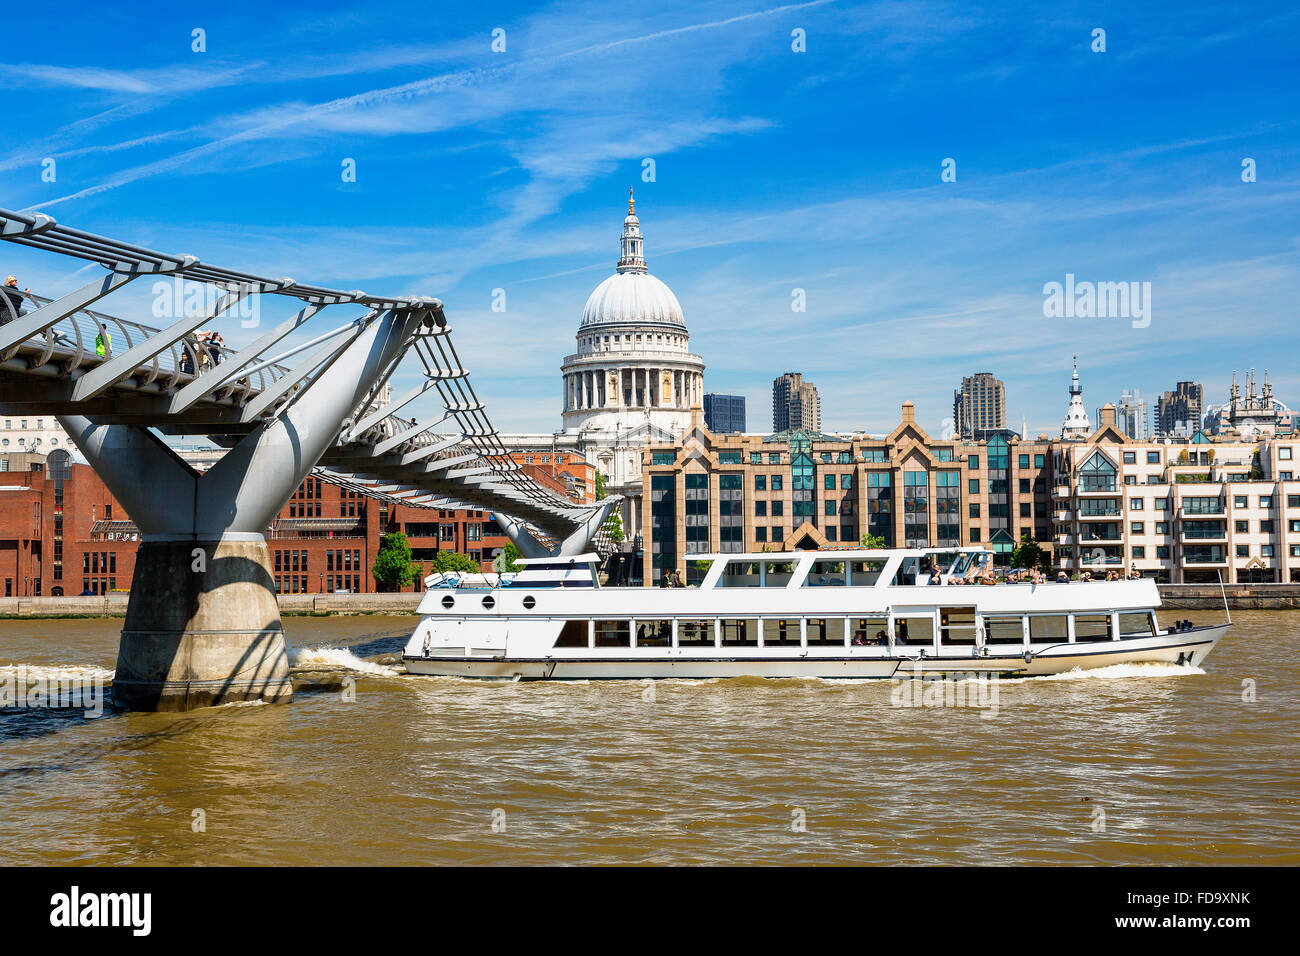 London, Traffic on the Thames River Stock Photo